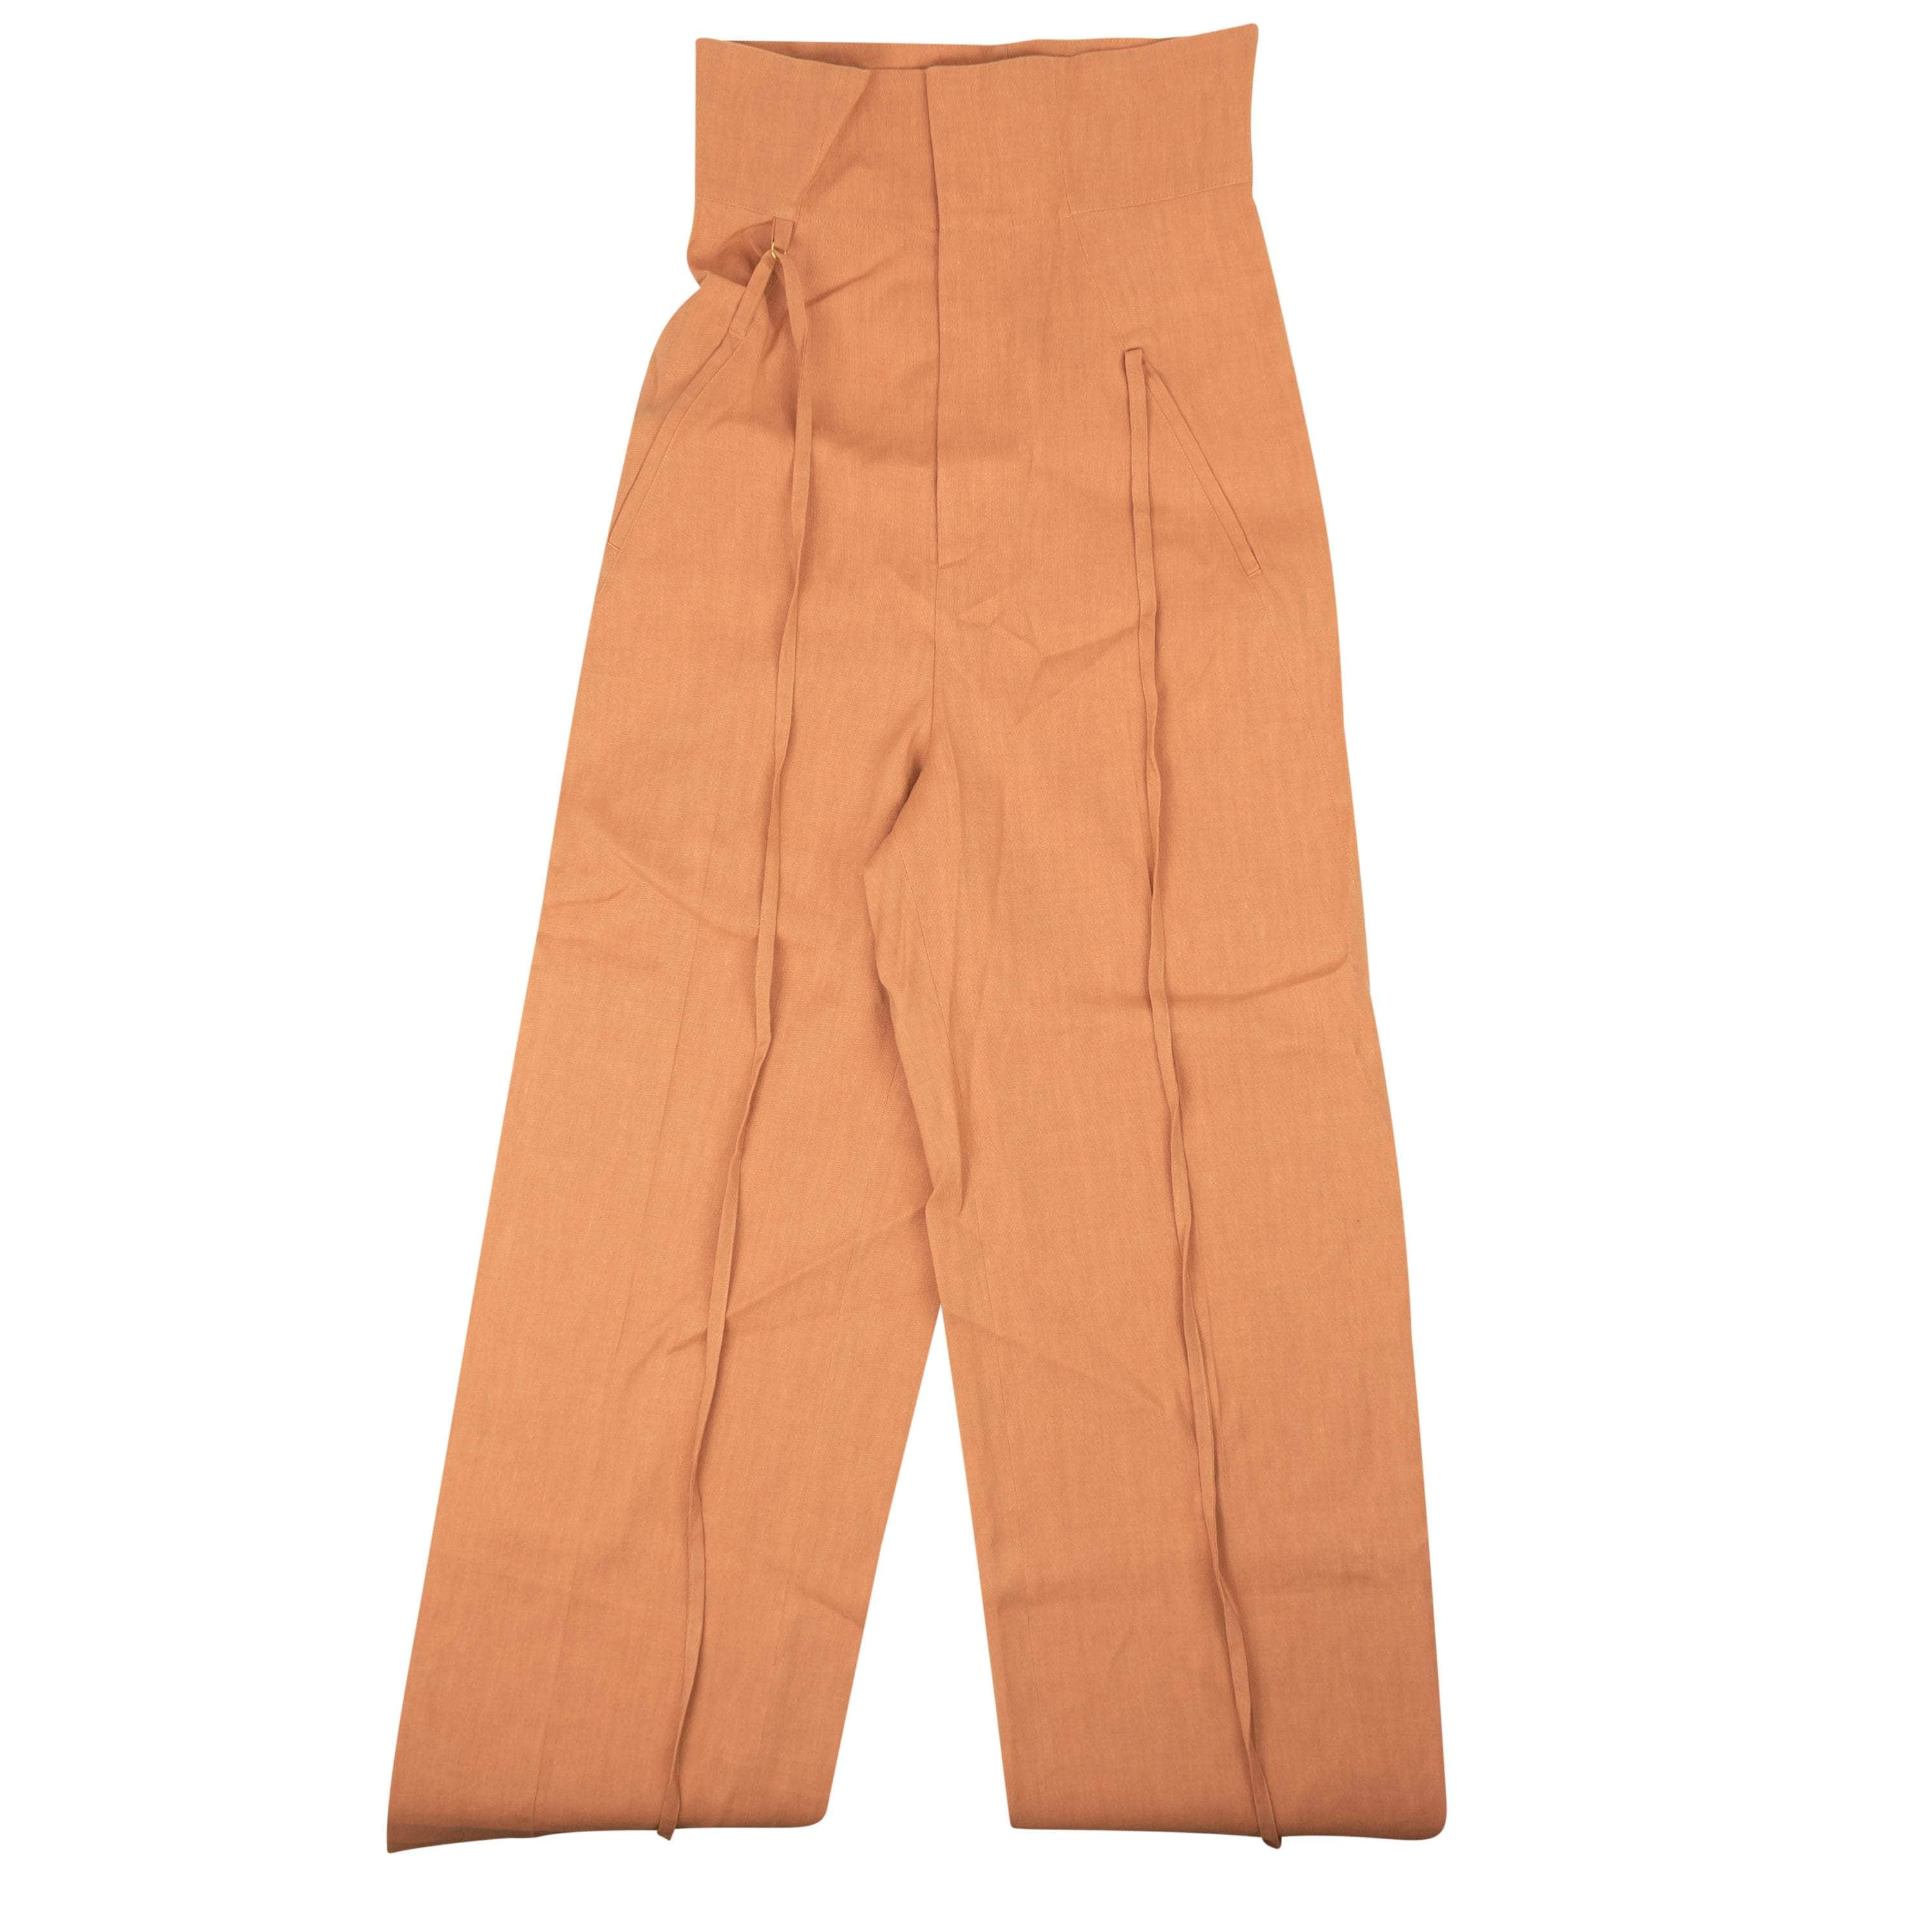 Jacquemus 500-750, channelenable-all, chicmi, couponcollection, gender-womens, main-clothing, size-38, womens-wide-leg-pants 38 Coral Le Pantalon Novio High Waisted Tie Pants 95-JQM-1026/38 95-JQM-1026/38